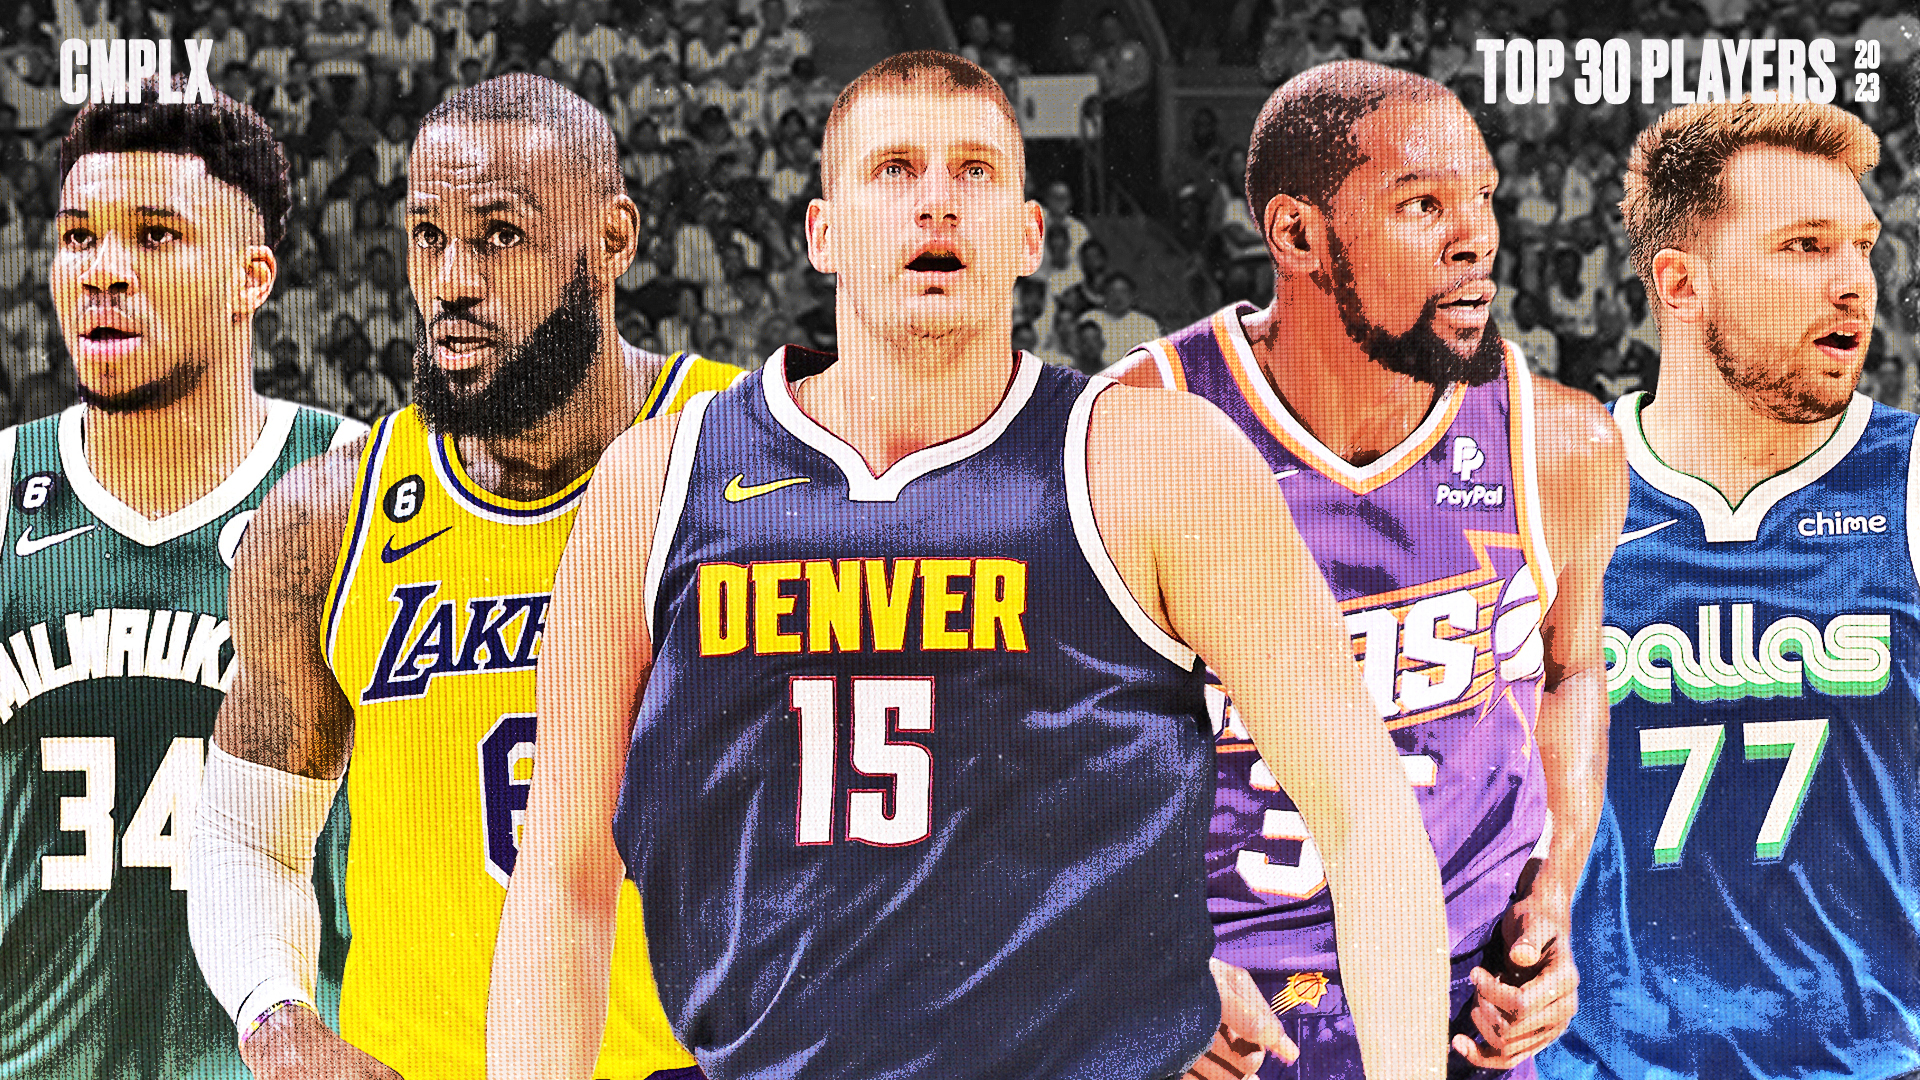 Kevin Durant Leads the Ranking of Top 20 NBA Players Going Into 2022